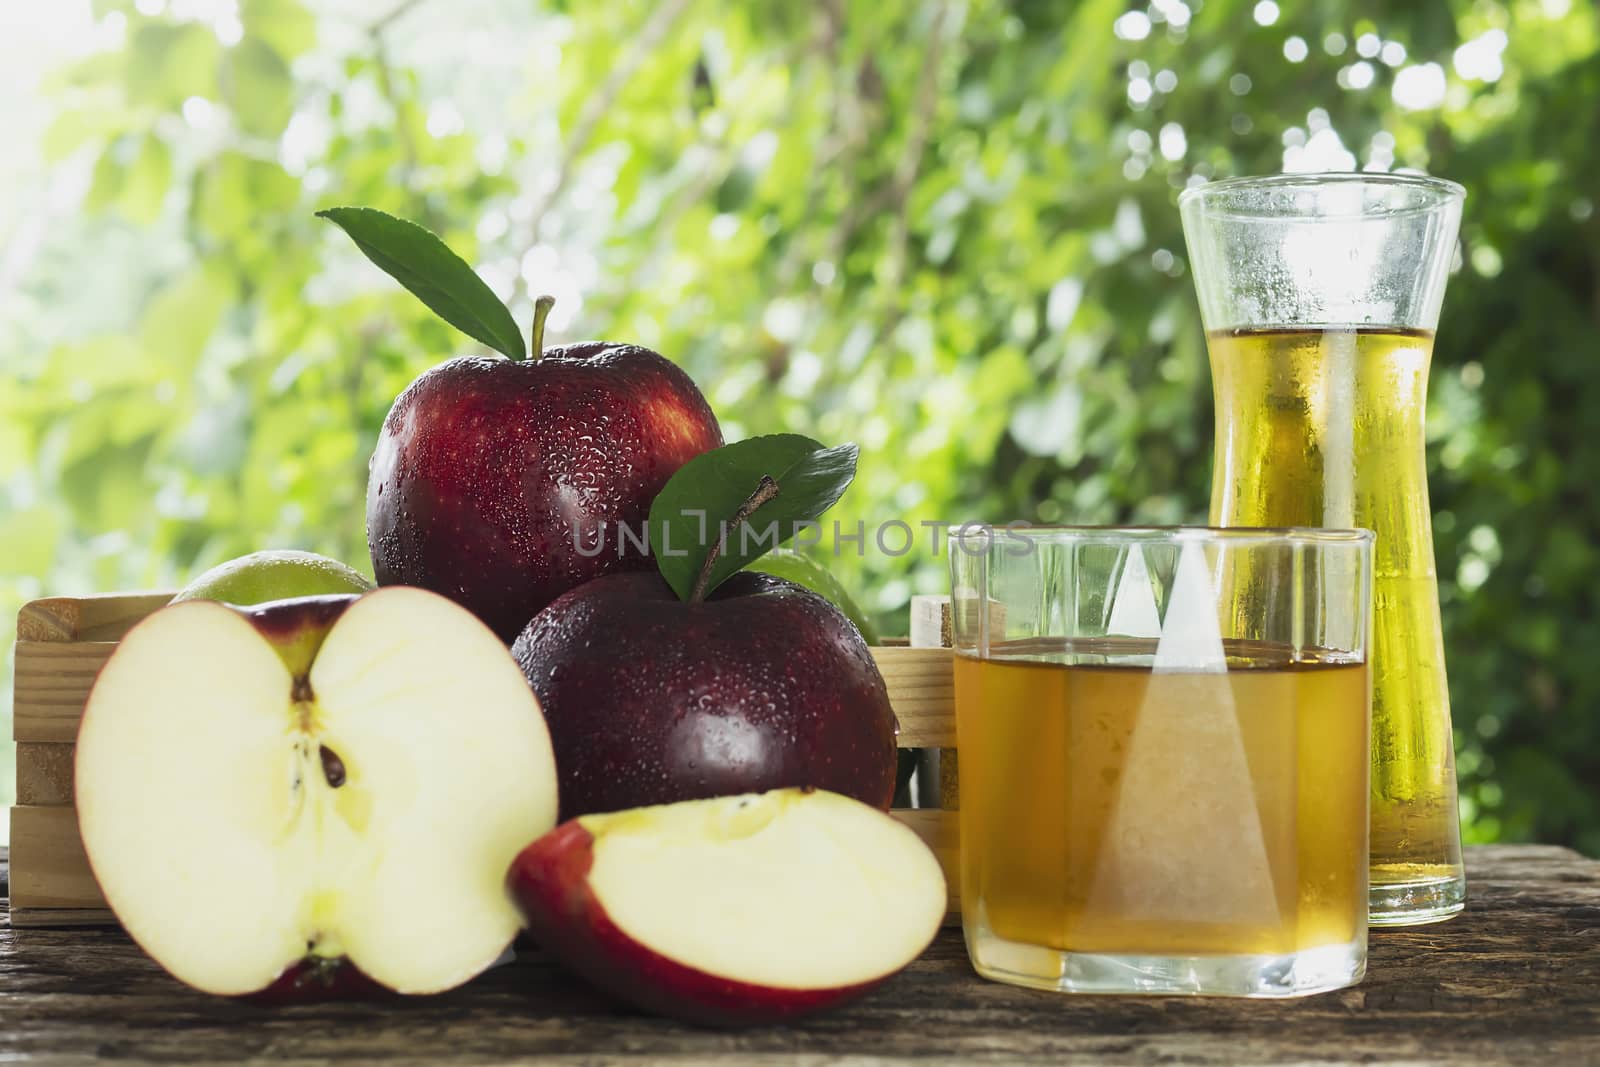 Fresh red apple with apple juice over white background - fresh fruit and juice product background concept